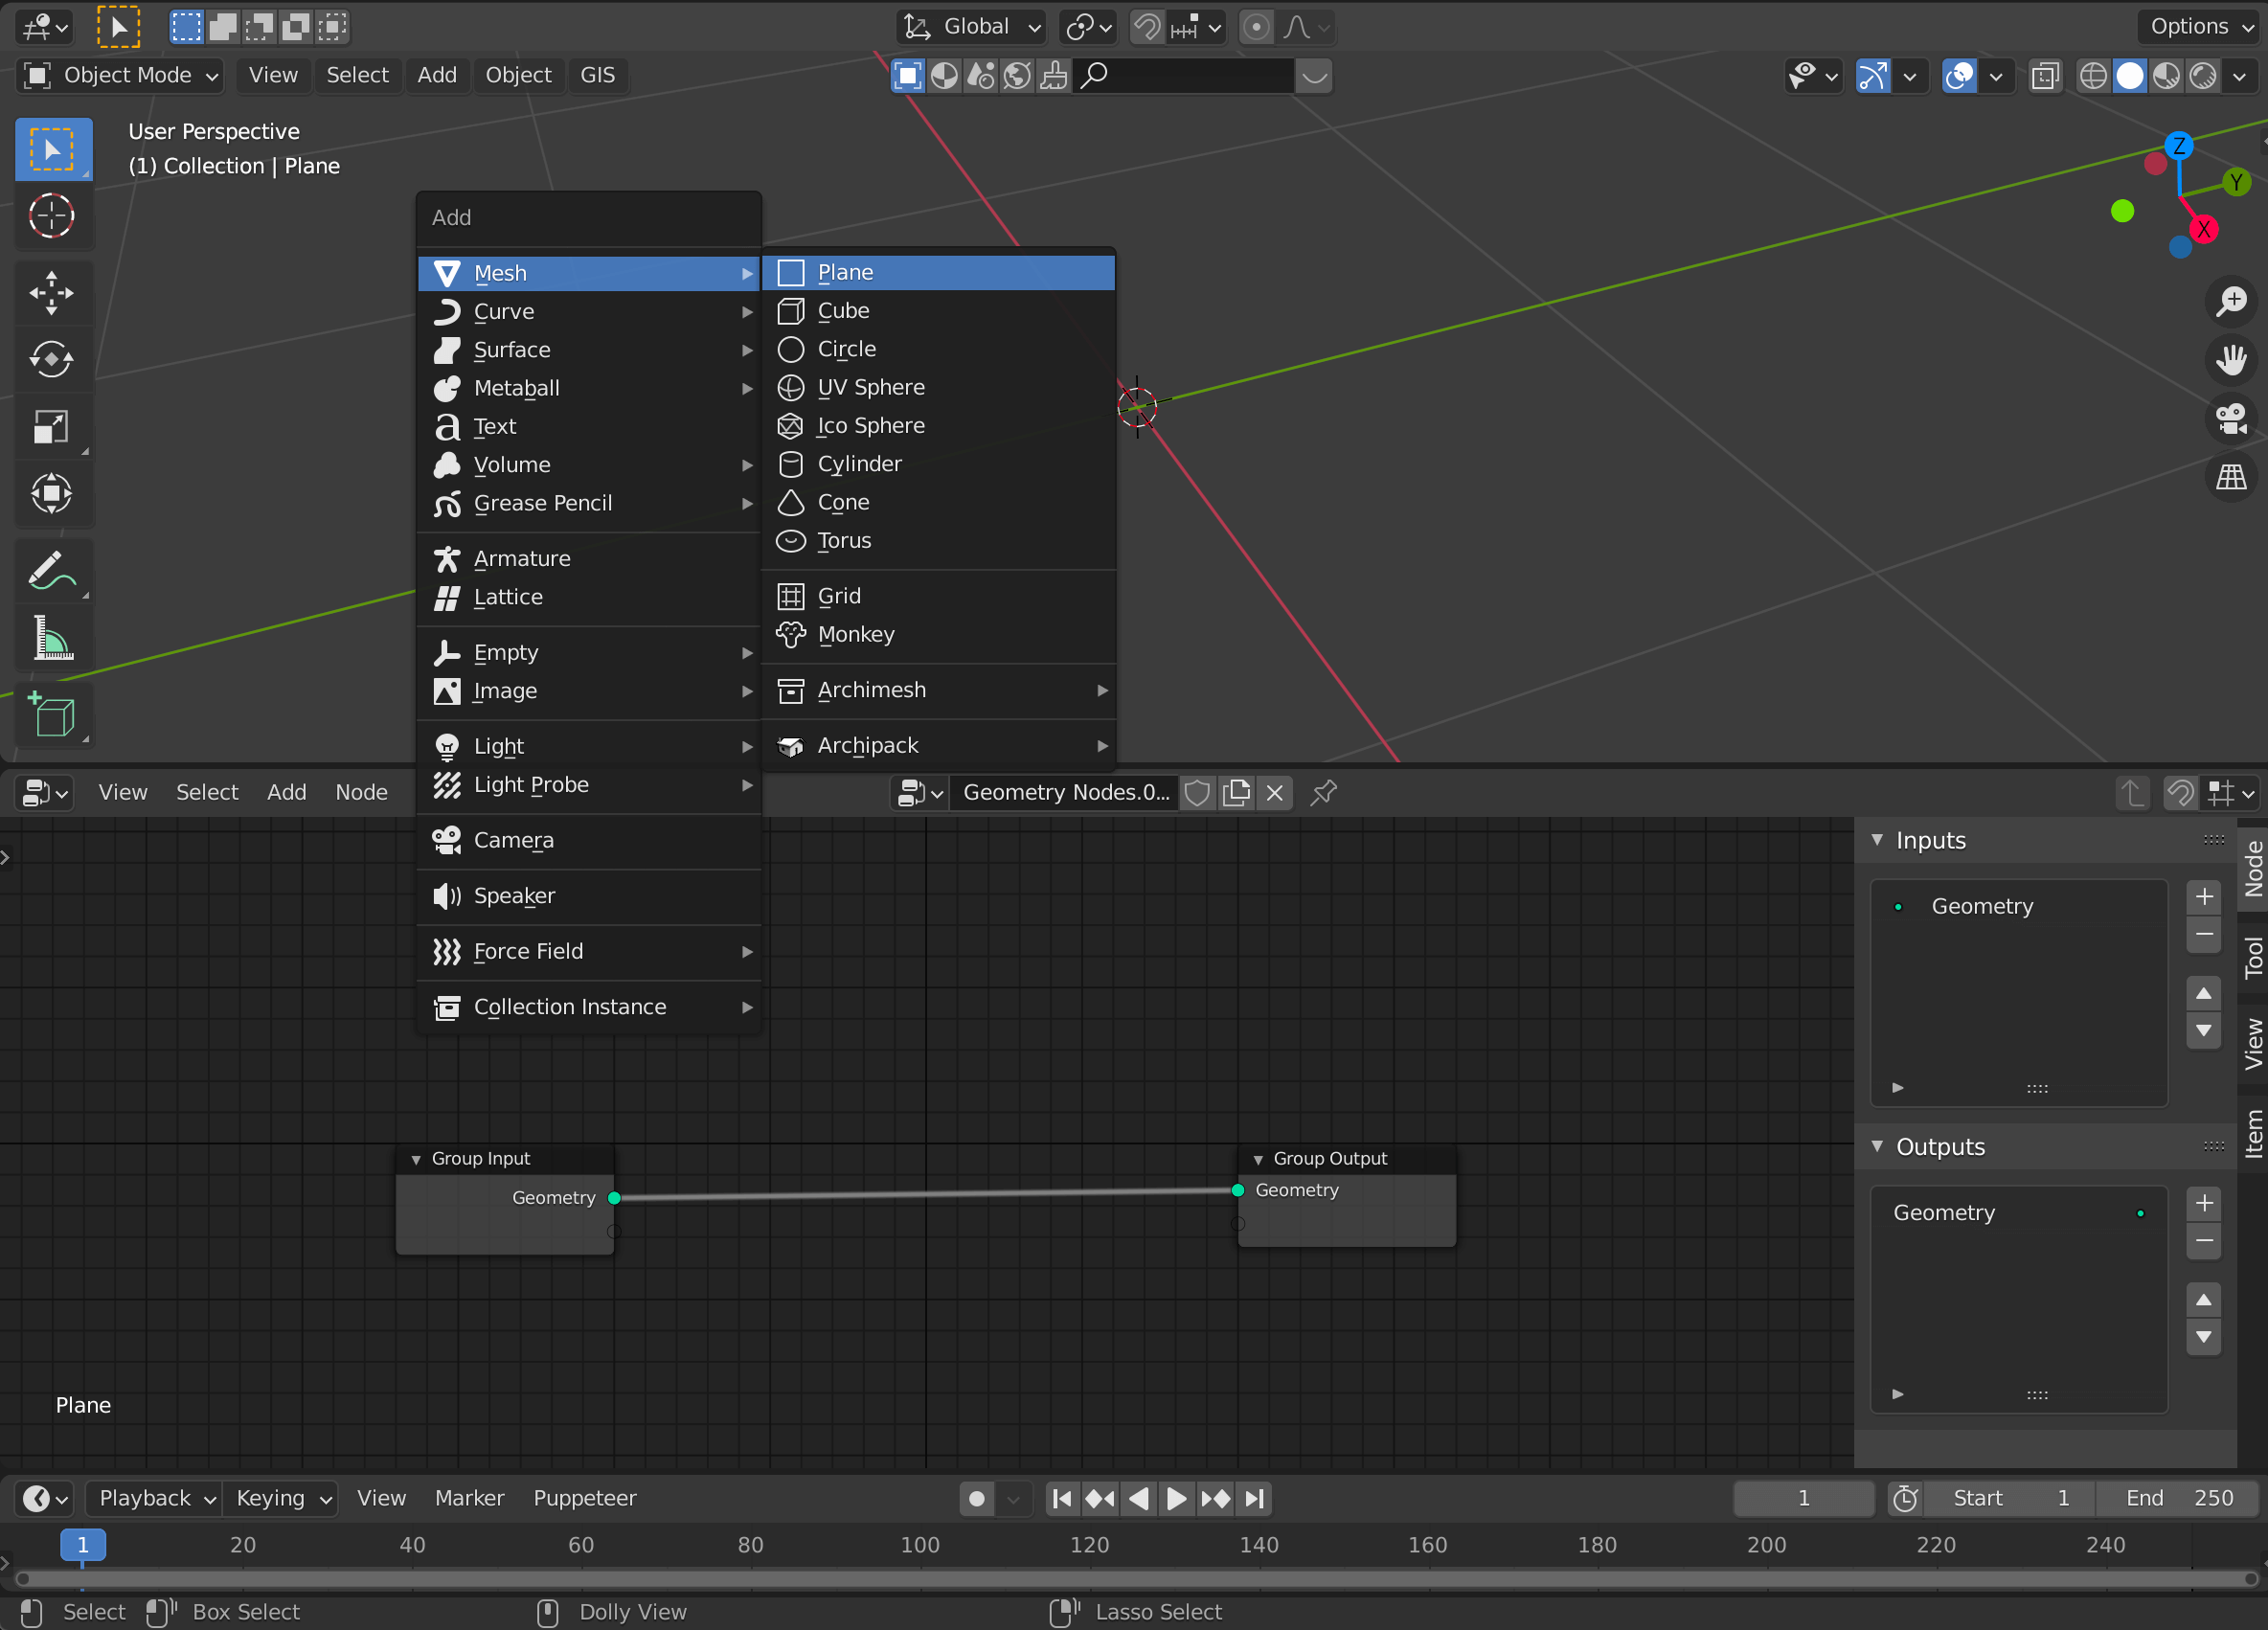 At the top of the screen, [Shift+A] -> Add Plane